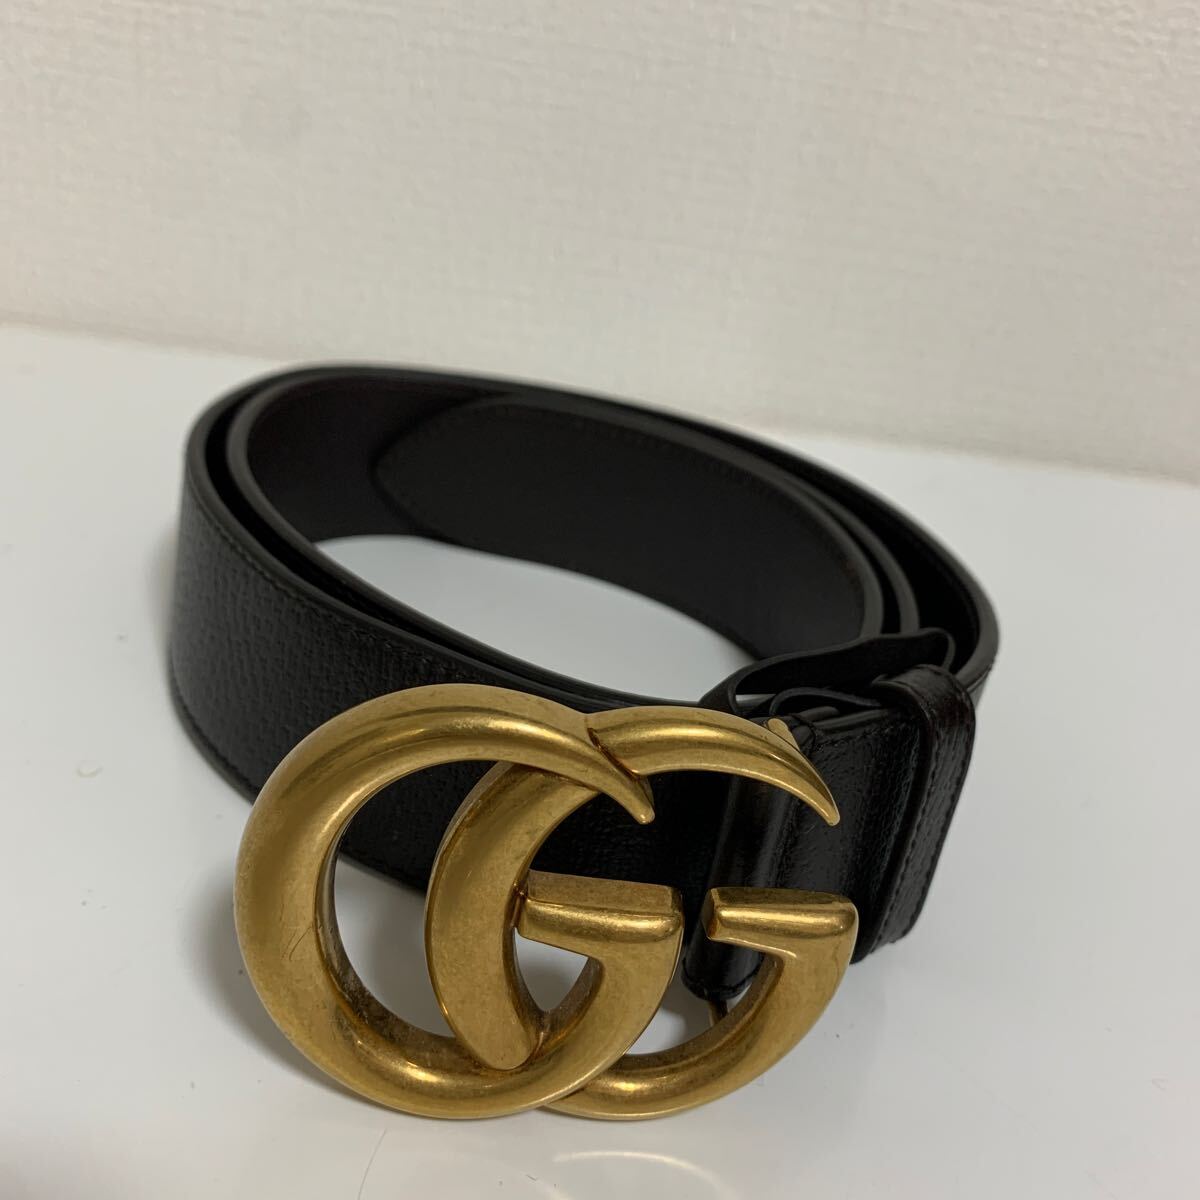  usage little beautiful goods GUCCI Gucci GGma-monto leather belt double G buckle Gold Brown 